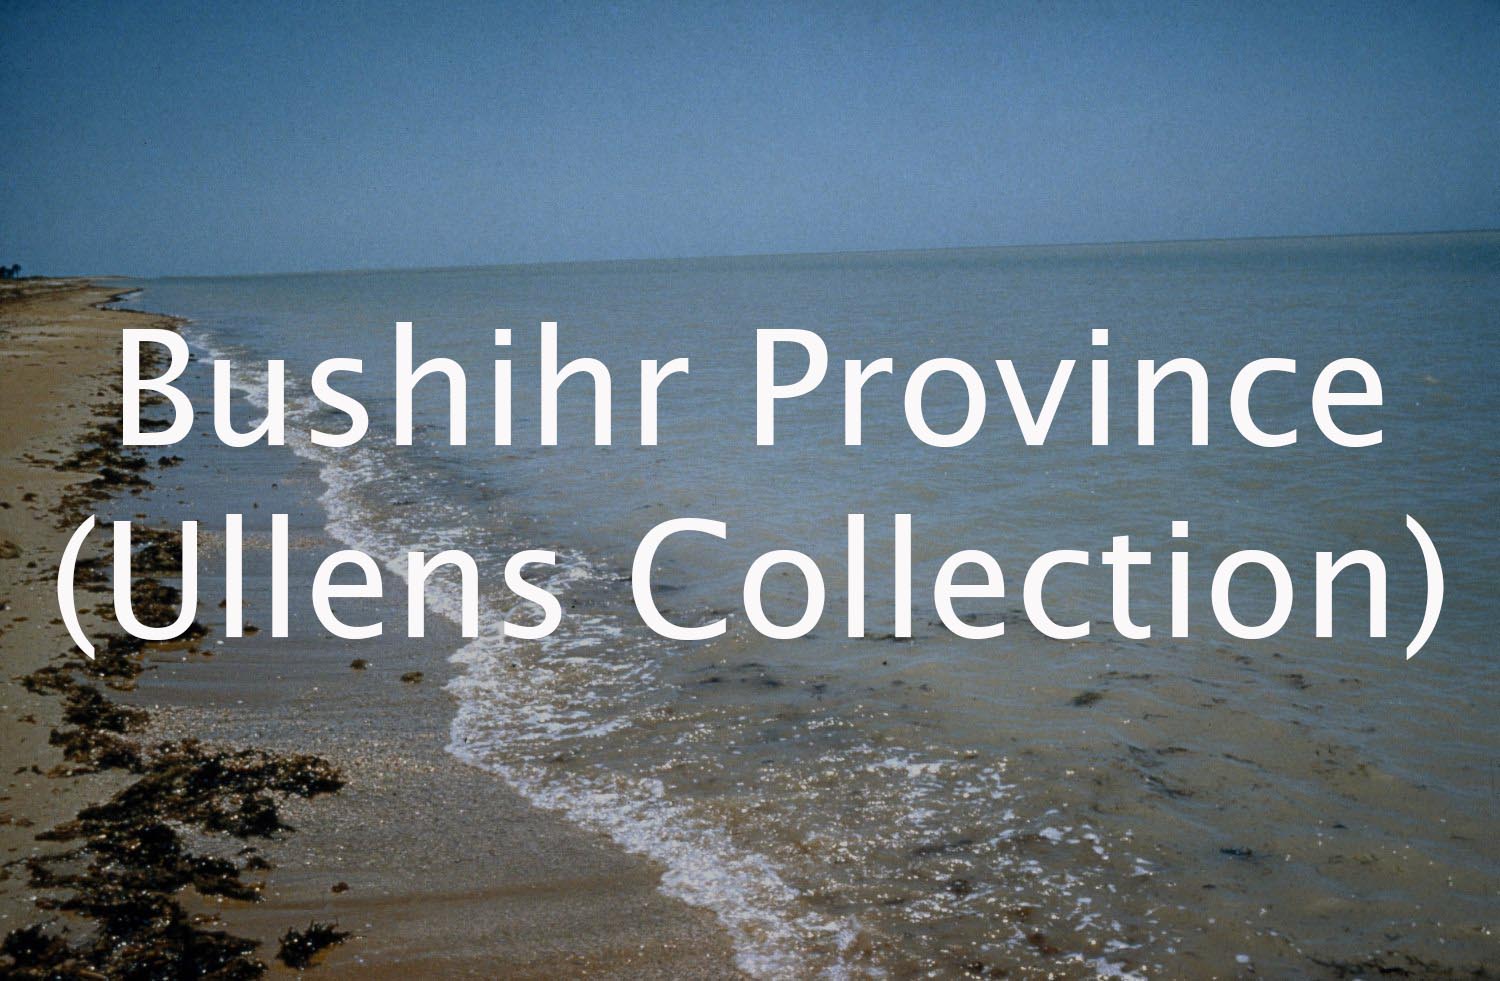 Bushihr Province (Ullens Collection)